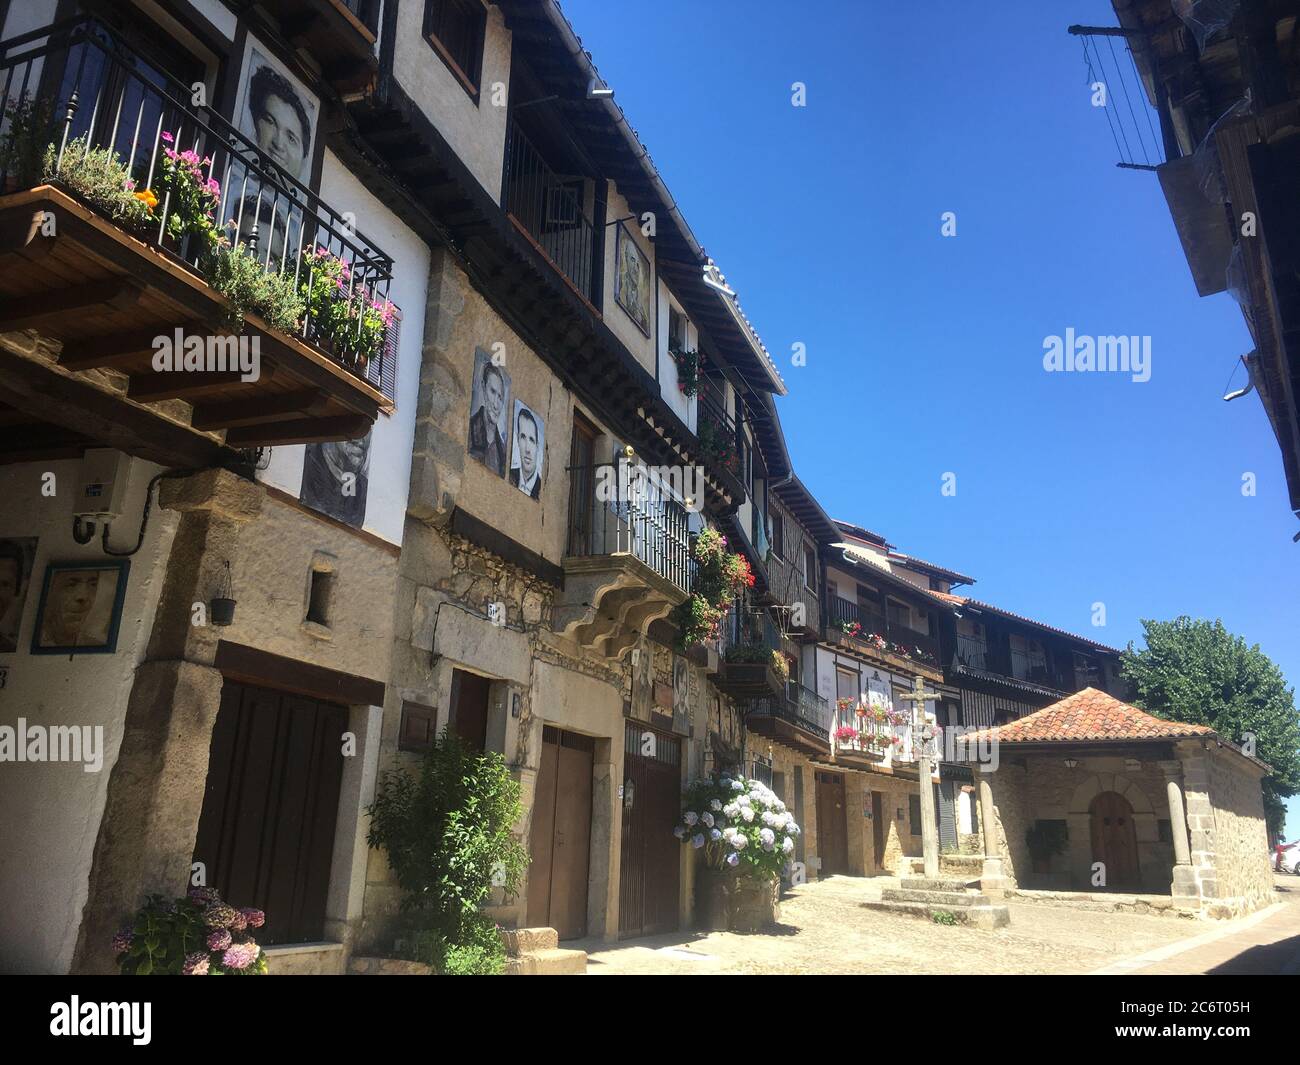 Mogarraz, a town called a historical and artistic complex, located in the heart of the Las Batuecas and Sierra de Francia Natural Park Stock Photo